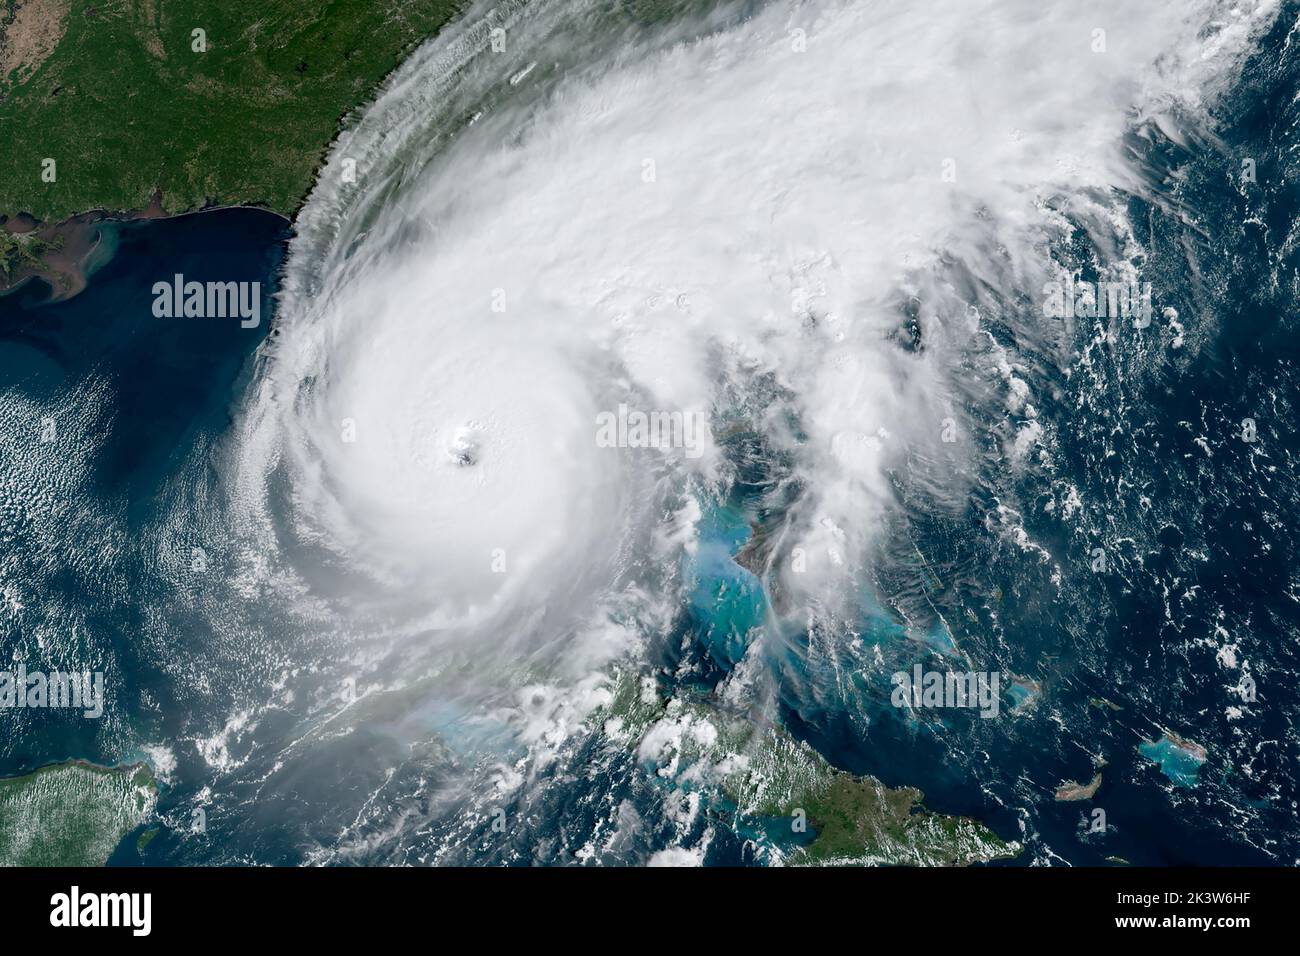 Hurricane Ian in the Gulf of Mexico Wednesday morning, September 28, 2022, just prior to landfall on the Southwest Florida Coast over Sanibel and Captiva Islands with 155 mph winds, just 2 mph under a Category 5 designation. (USA) Stock Photo